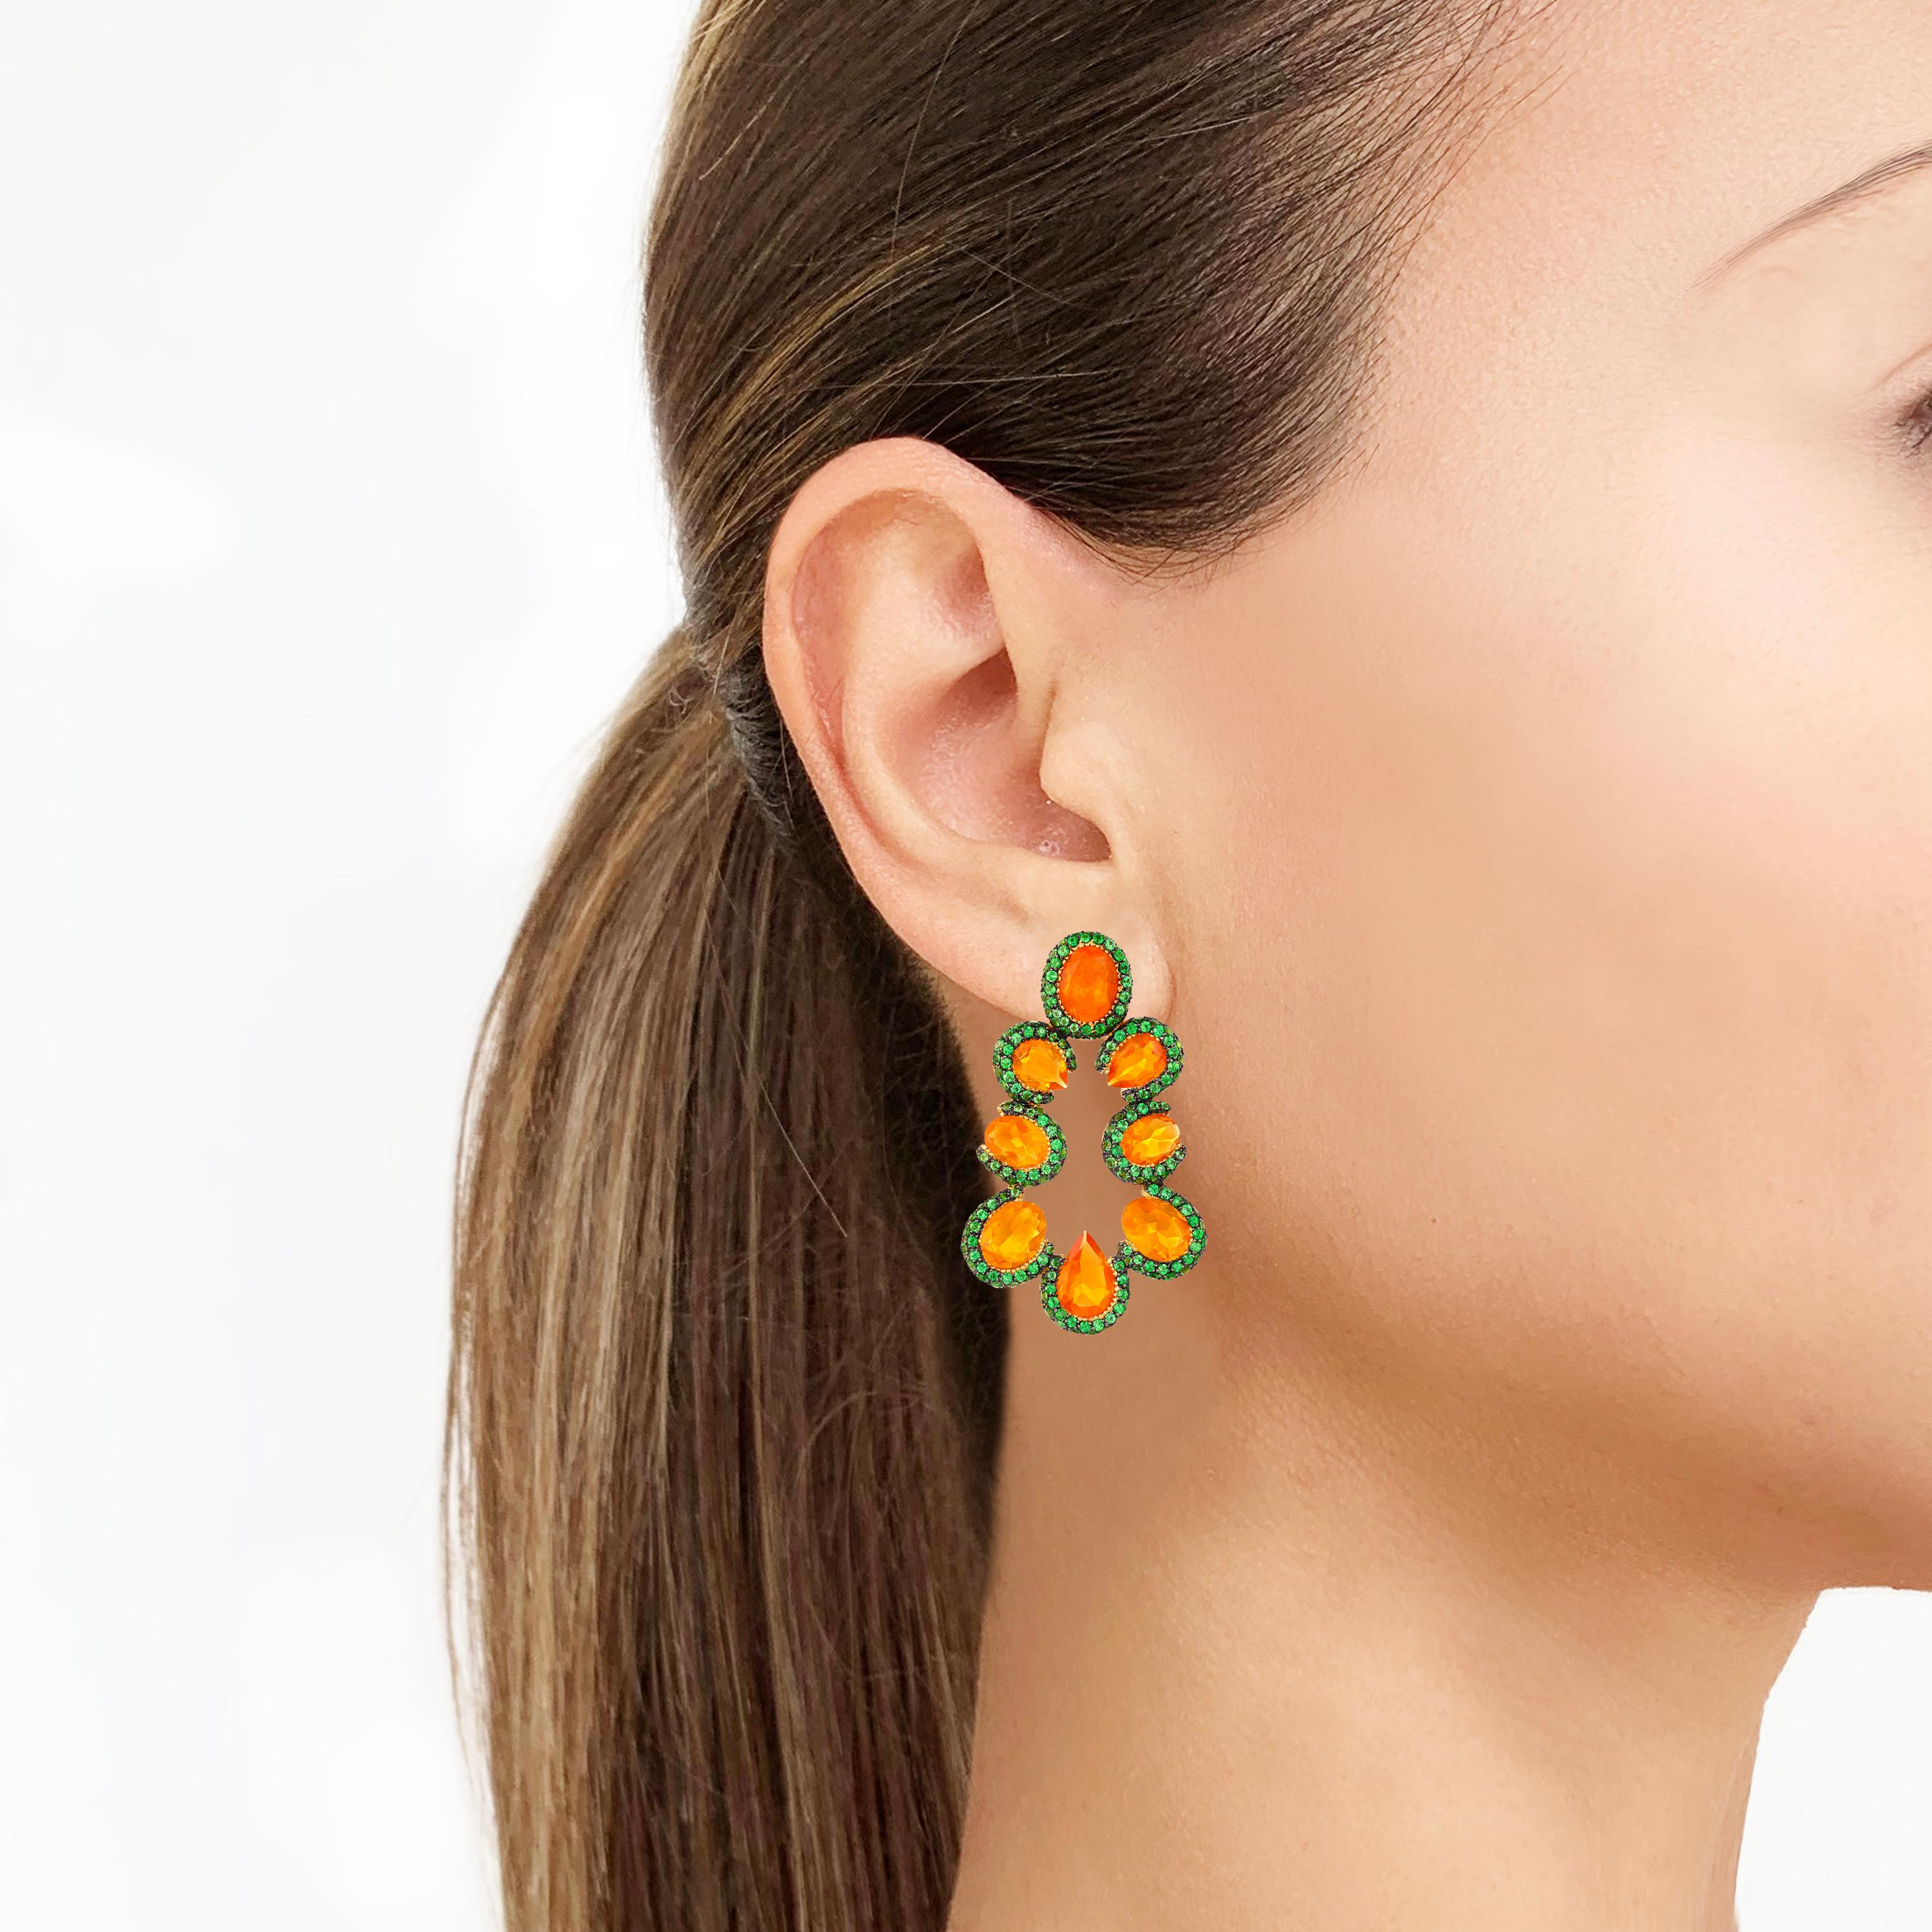 Rosior Contemporary Dangle Earrings manufactured in Yellow Gold and setted with:
- 6 Pear Cut 